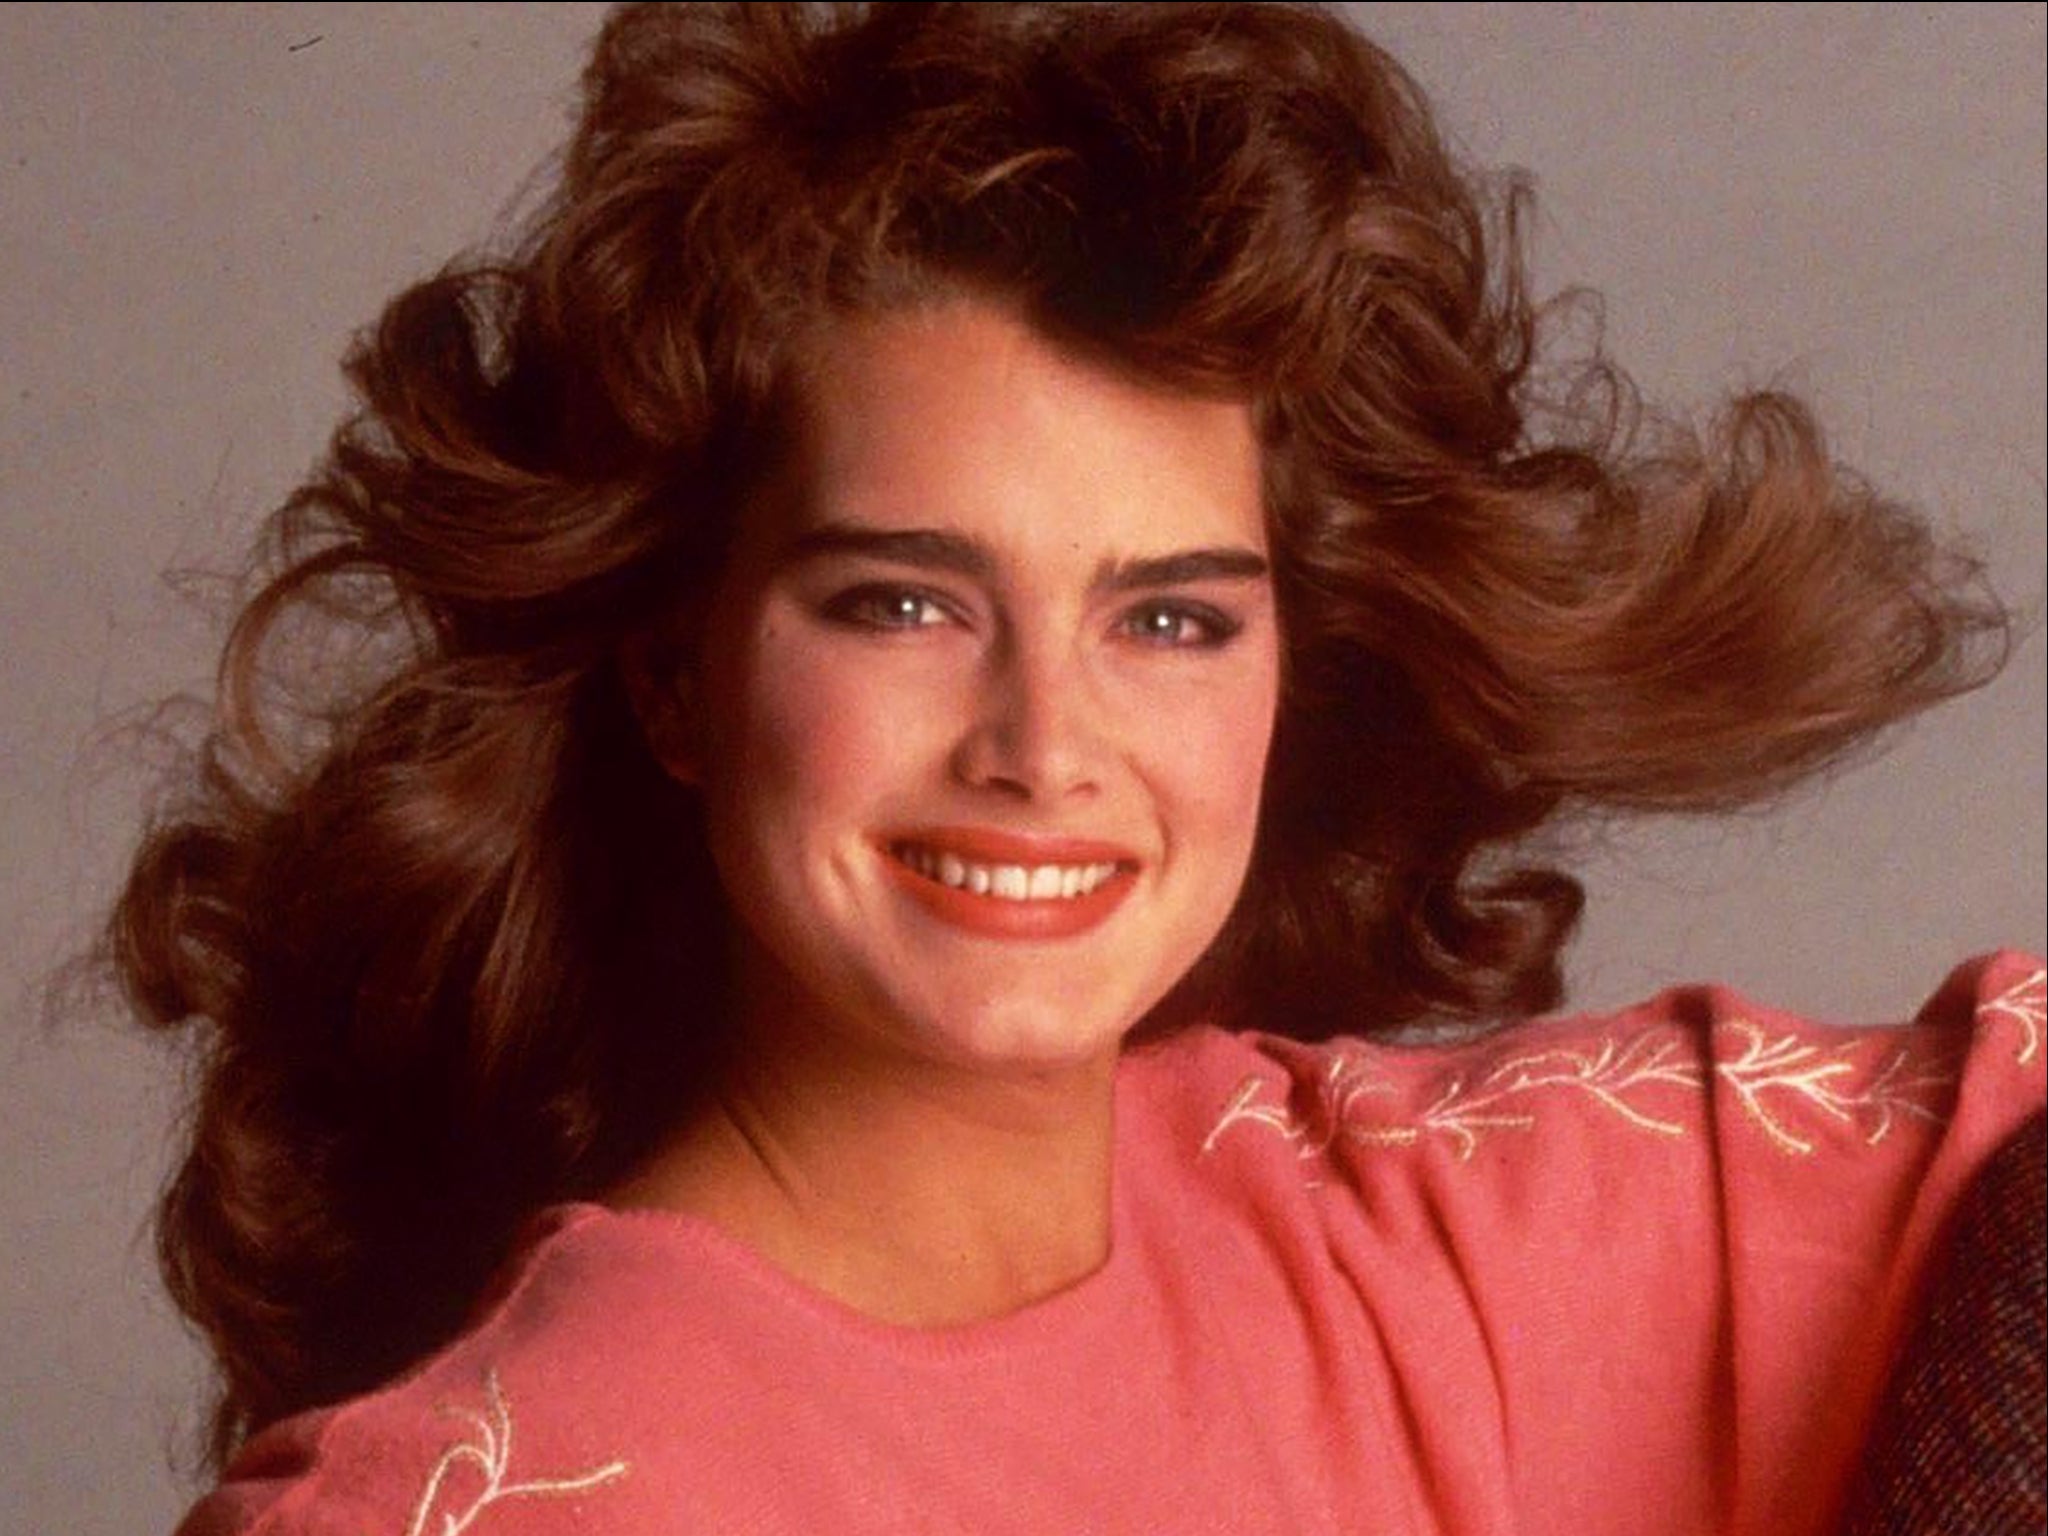 Sex Fast Time 16yet - Pretty Baby: The more you learn about Brooke Shields, the more remarkable  she seems | The Independent